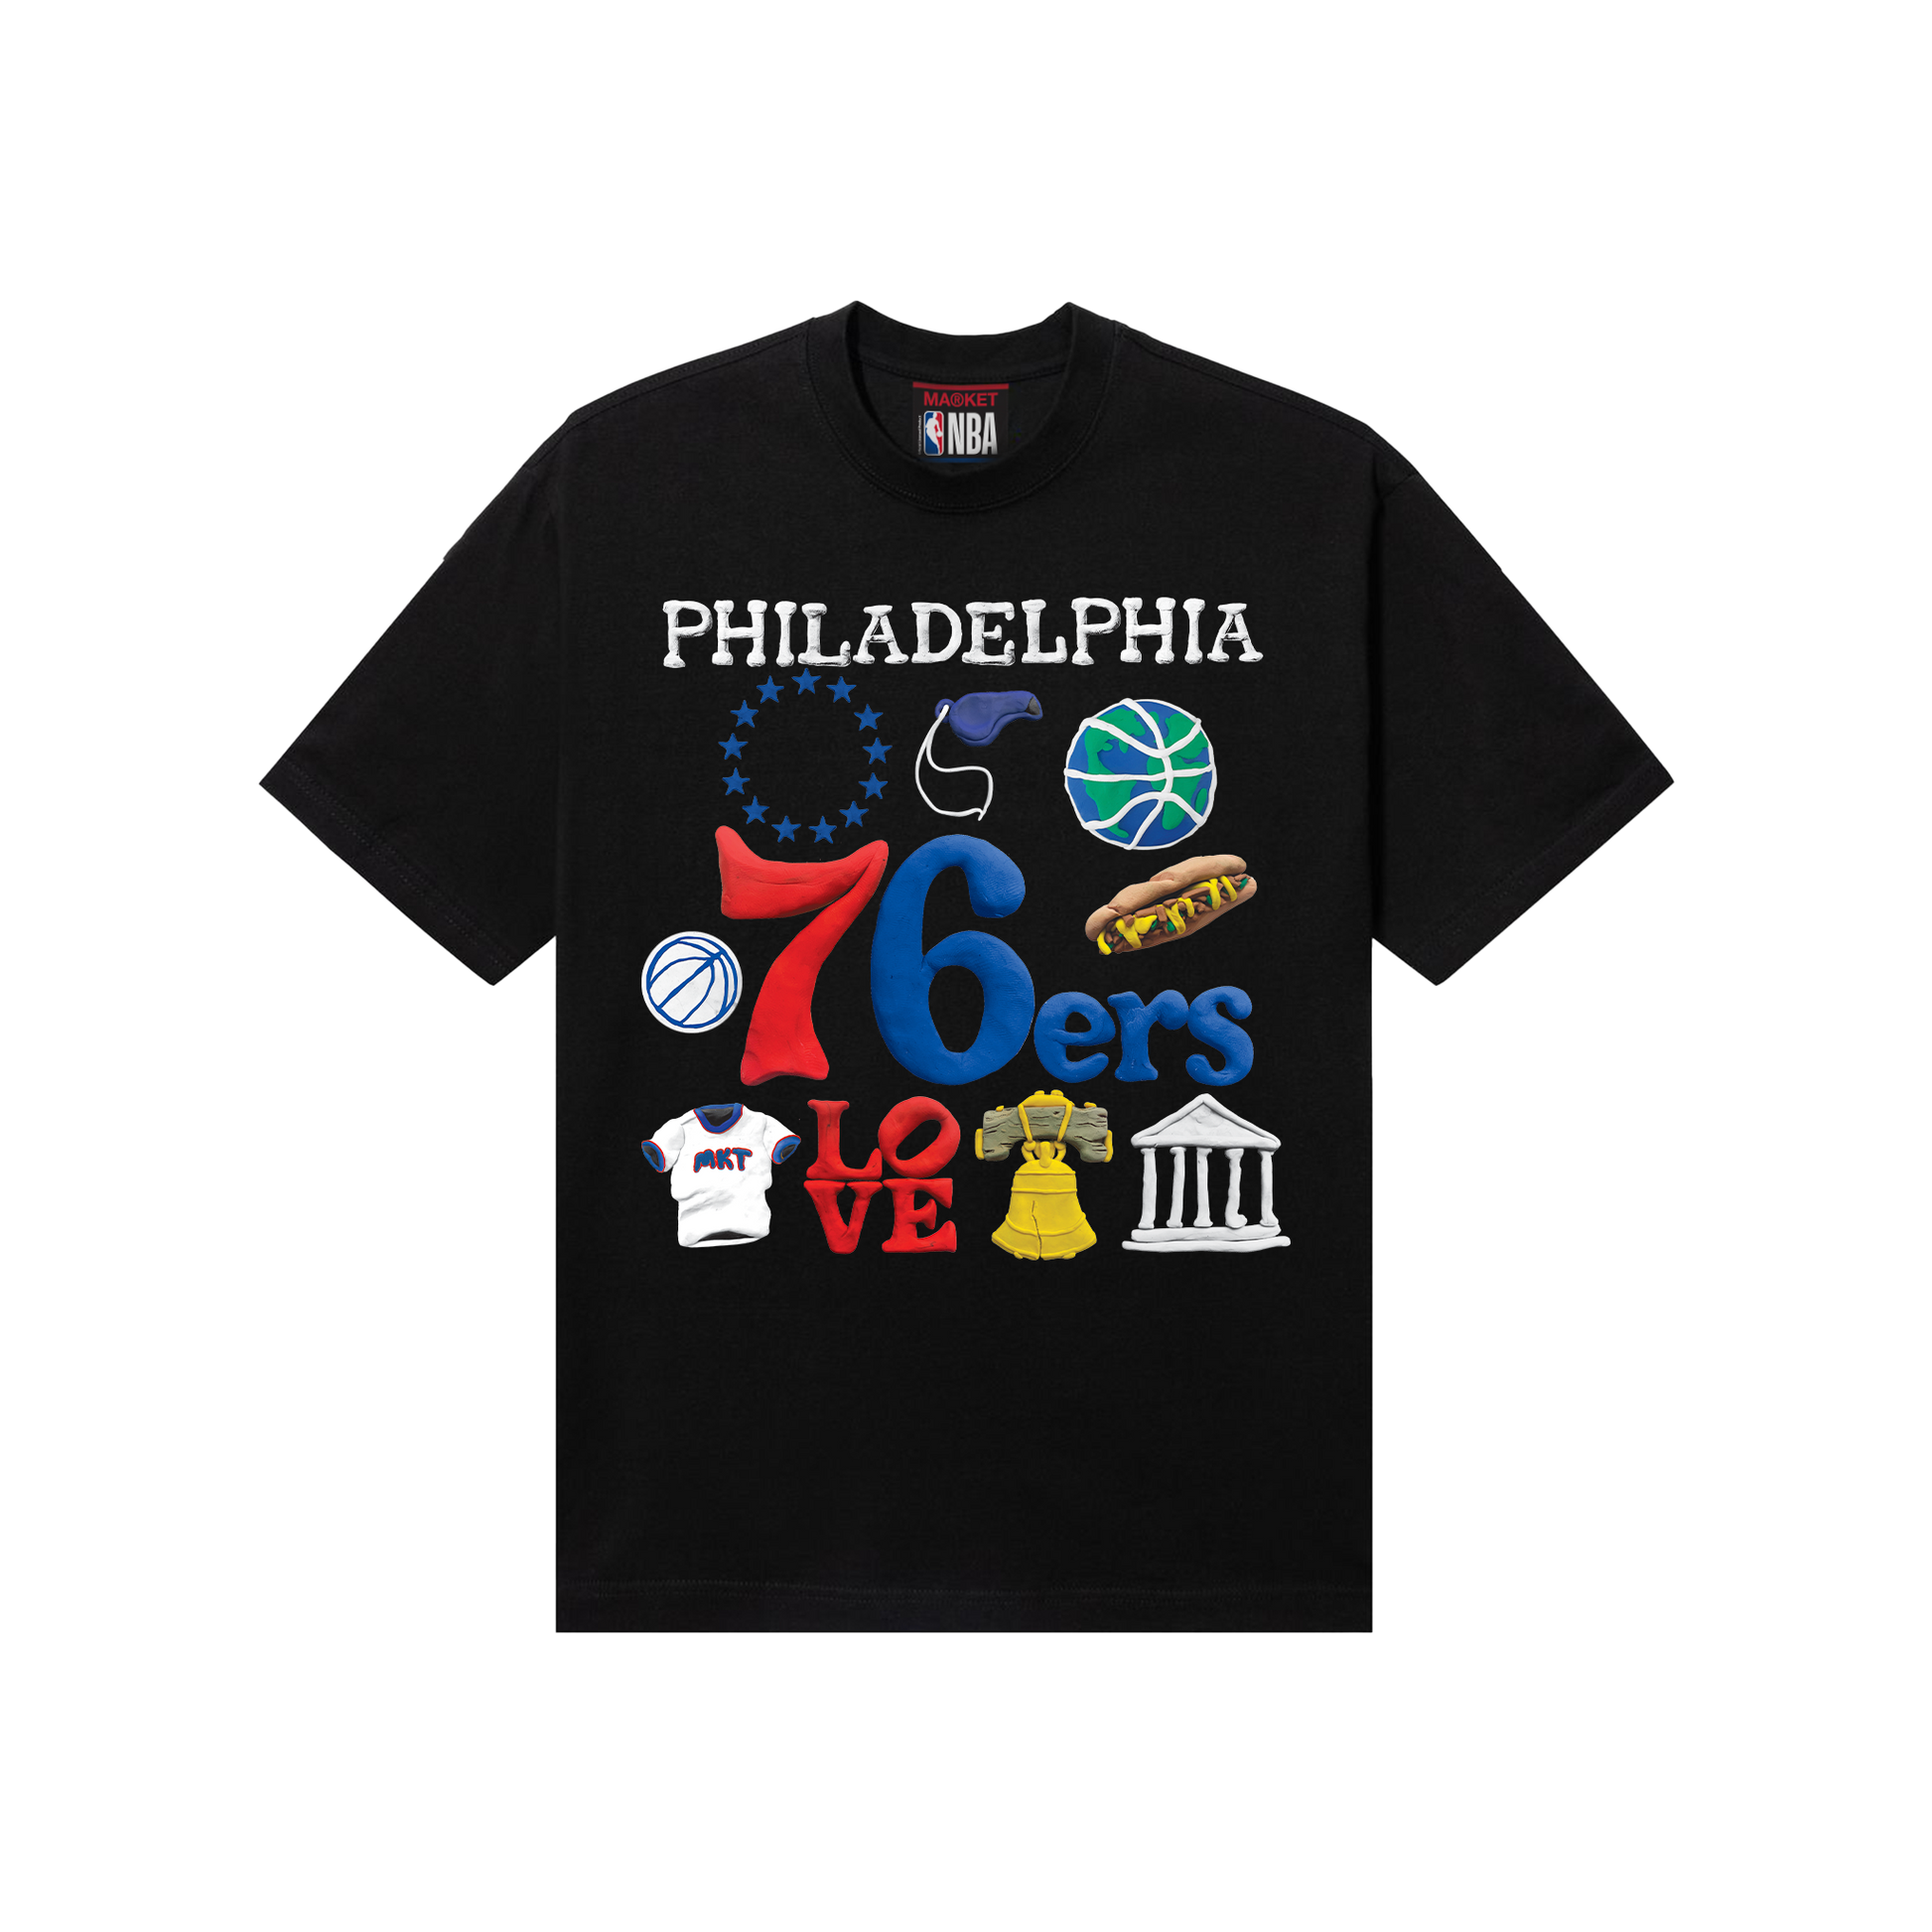 MARKET clothing brand MARKET 76ERS T-SHIRT Find more graphic tees, hats, hoodies and more at MarketStudios.com. Formally Chinatown Market.